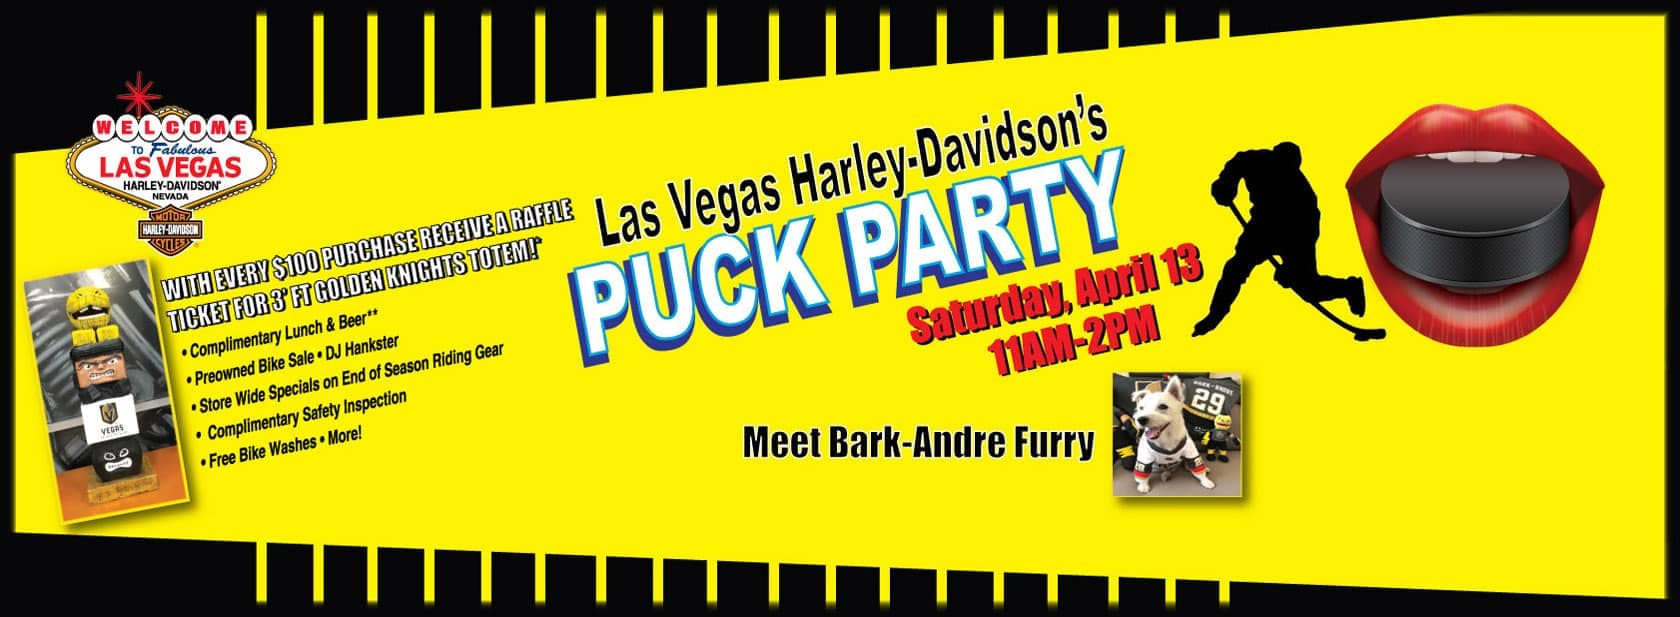 Don’t Miss the Puck Party on April 13th at Las Vegas Harley-Davidson